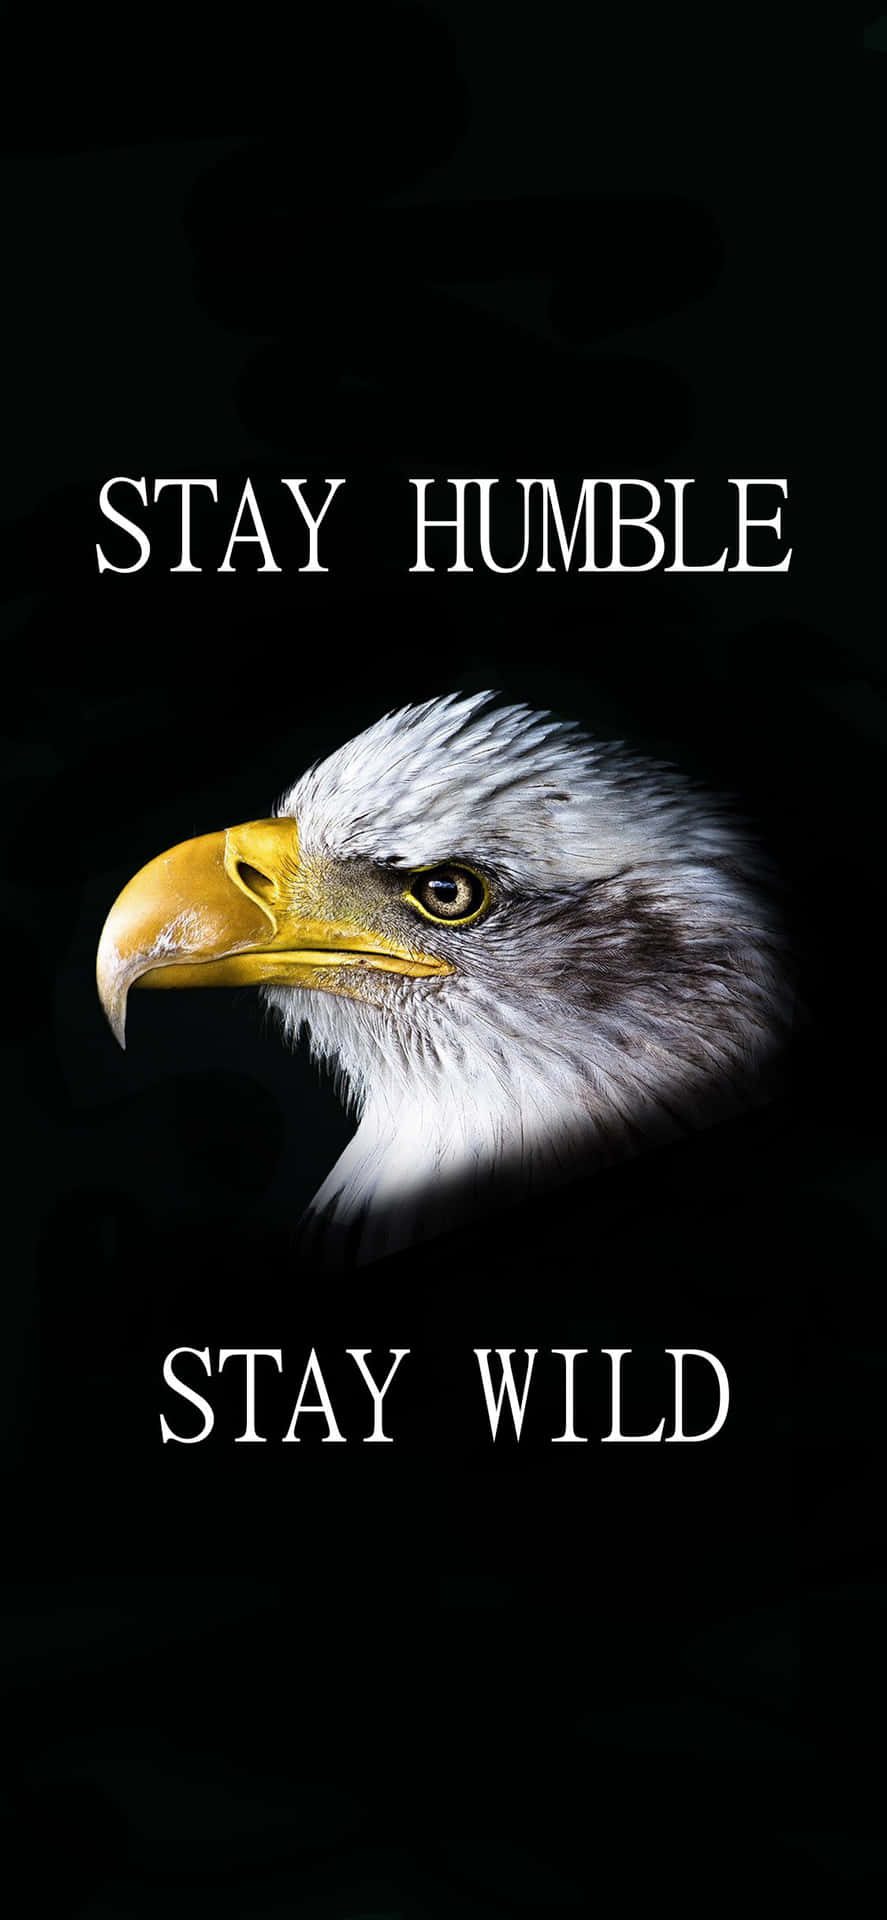 Download Stay Humble Wallpaper